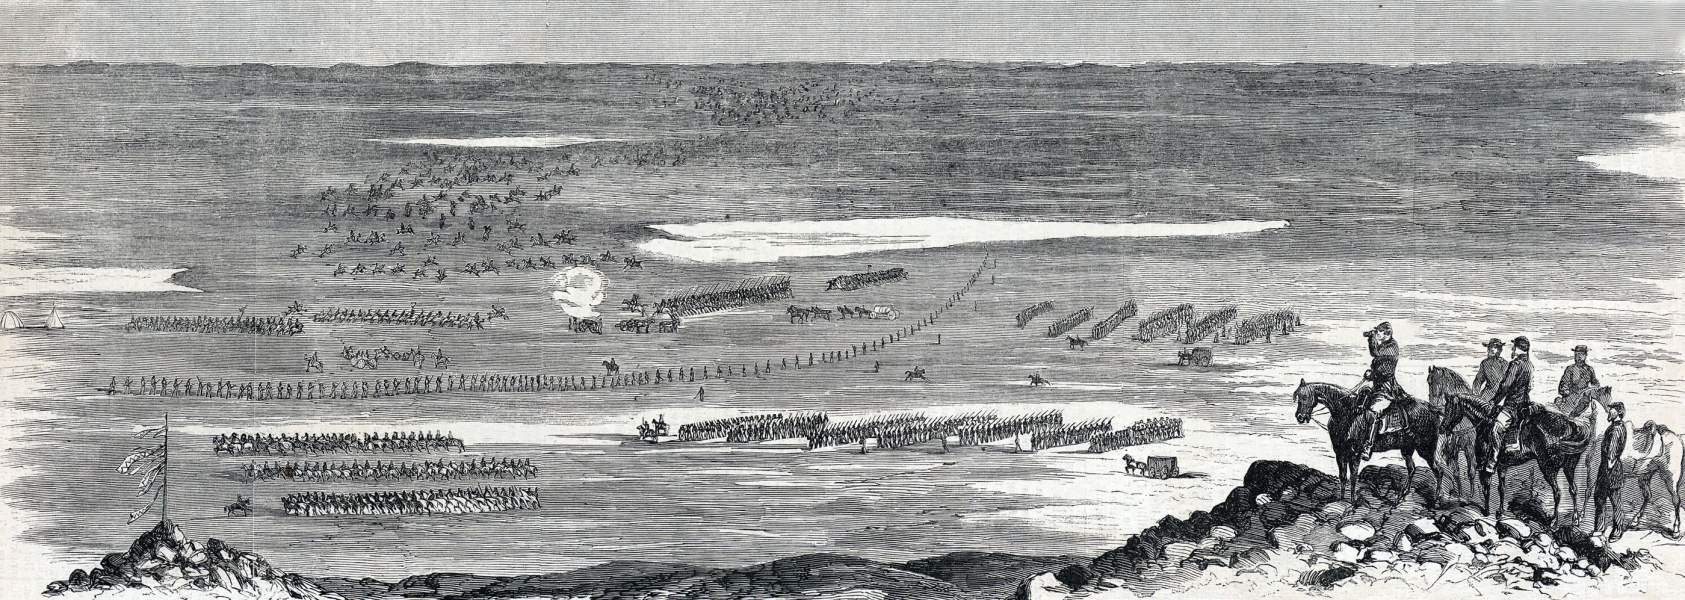 Sibley's troops in pursuit of defeated Sioux after Battle of Big Mound,  July 20,1863, artist's impression, zoomable image